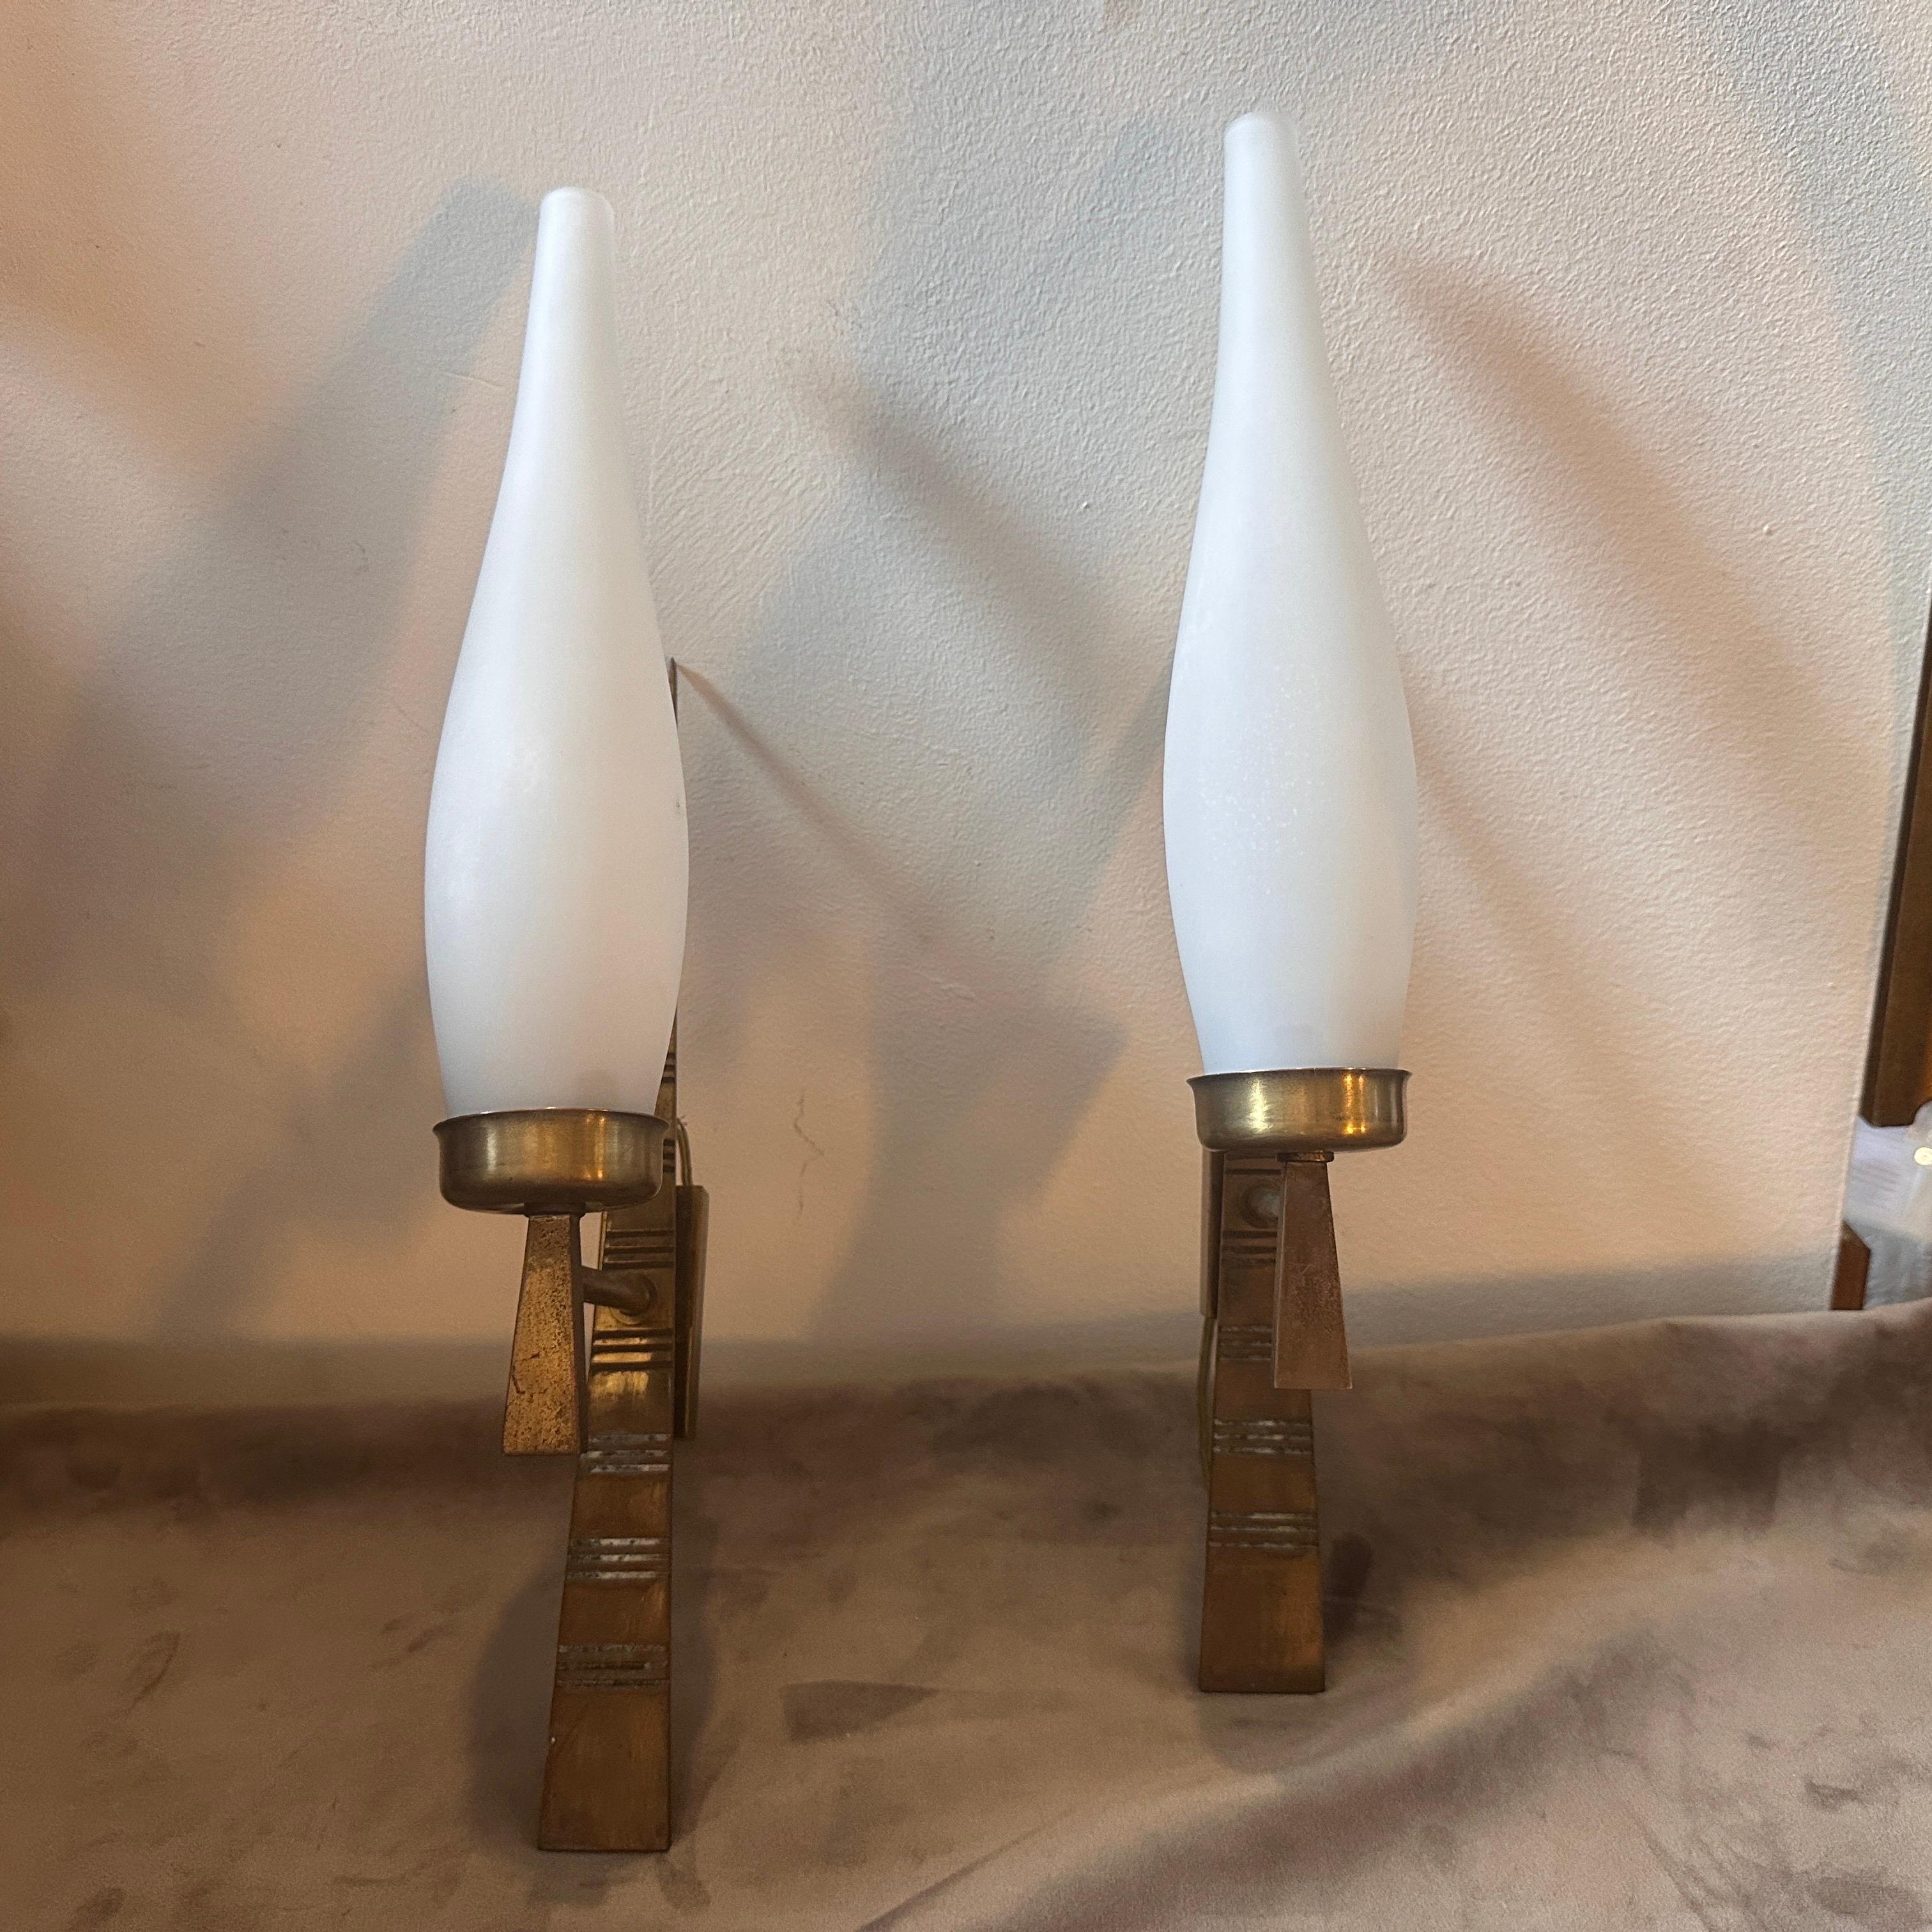 This pair of Wall Sconces designed and manufactured in Italy in the Sixties are iconic examples of lighting fixtures that emerged during the mid-20th century. These sconces combine elements of both form and function, reflecting the design aesthetics